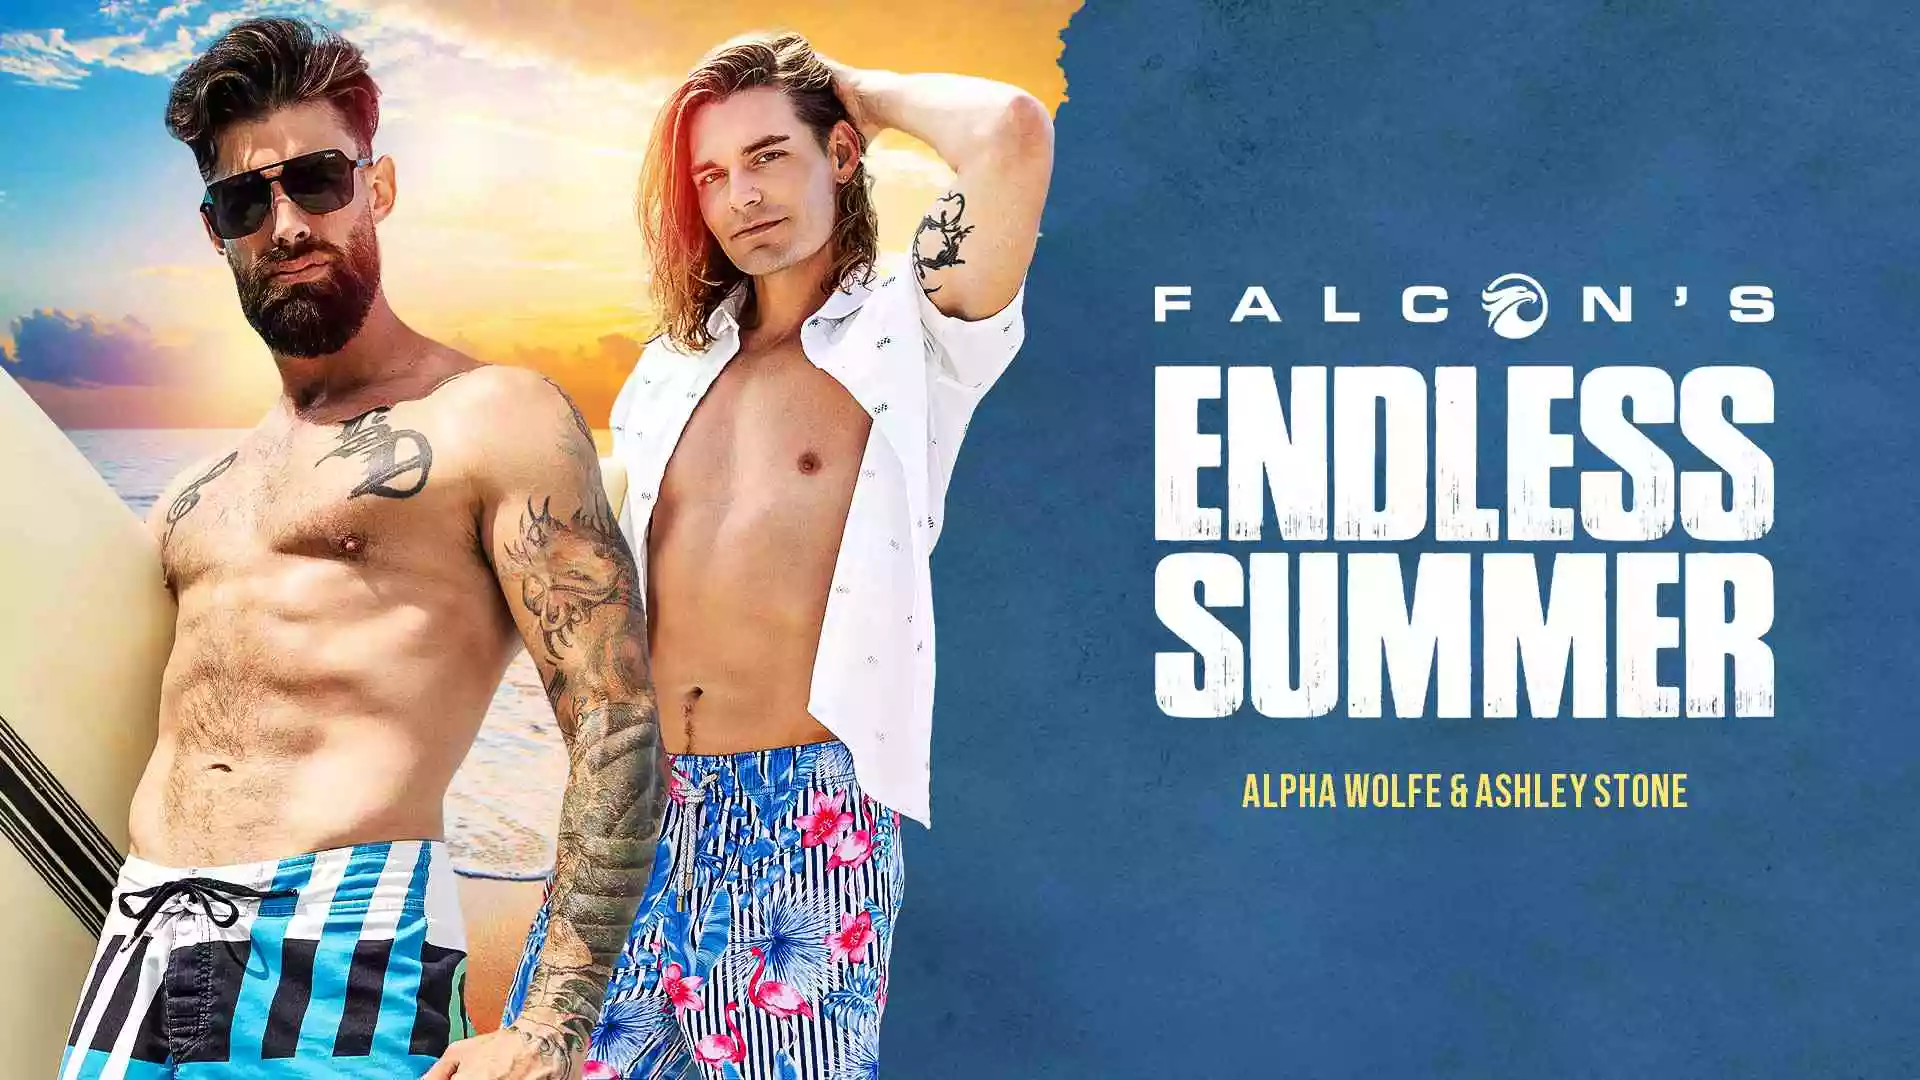 Falcon’s Endless Summer, Scene 3 – Alpha Wolfe and Ashley Stones